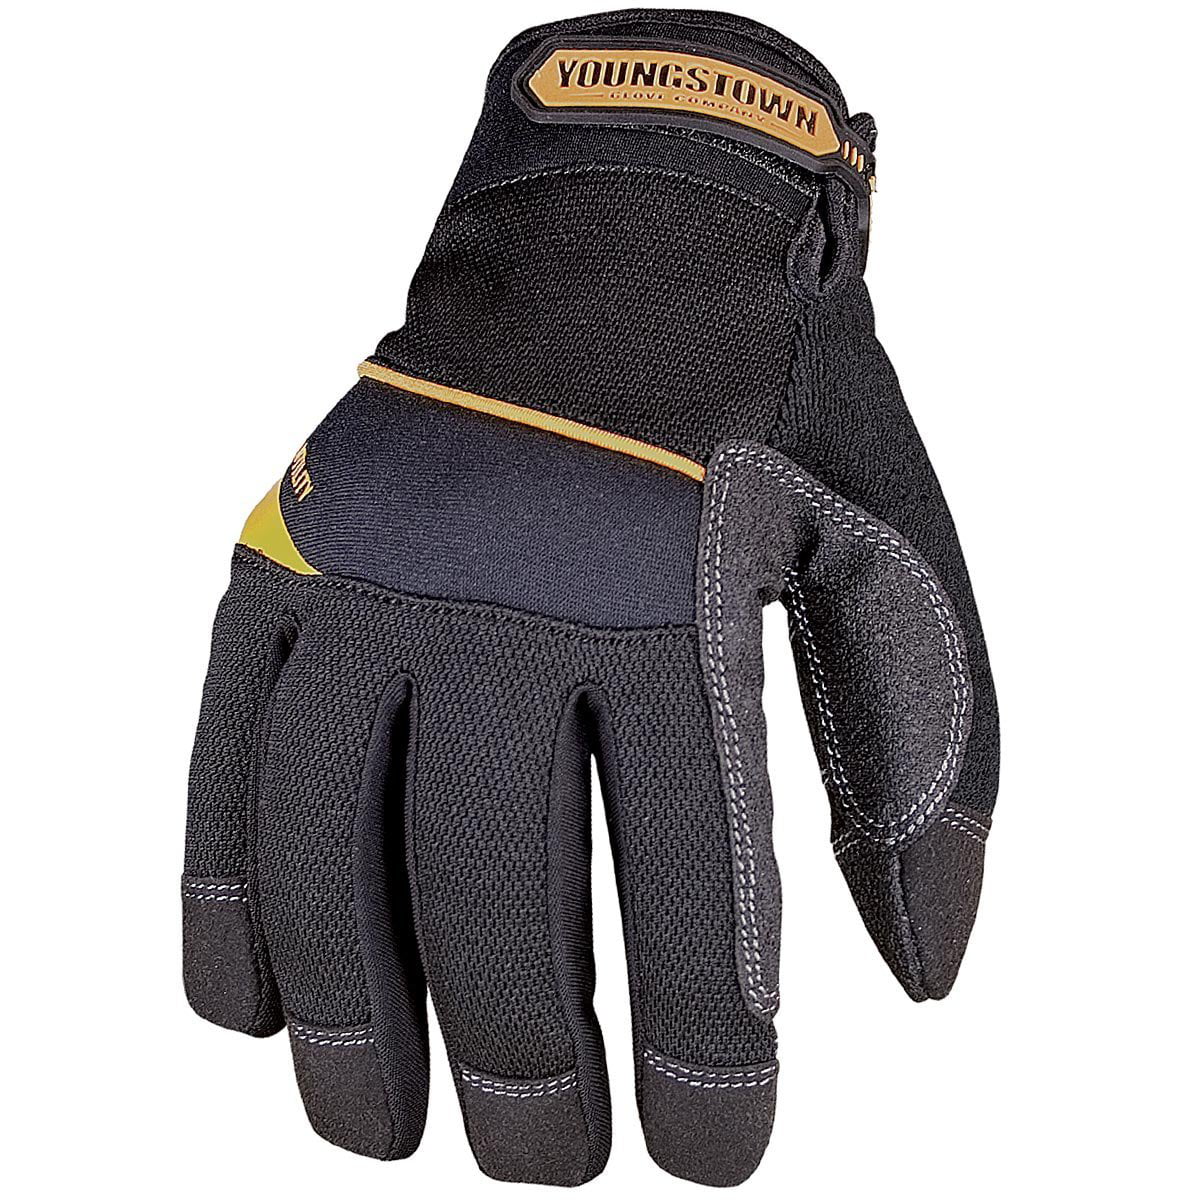 General Utility All Purpose Work Gloves M Black ~ New 2 